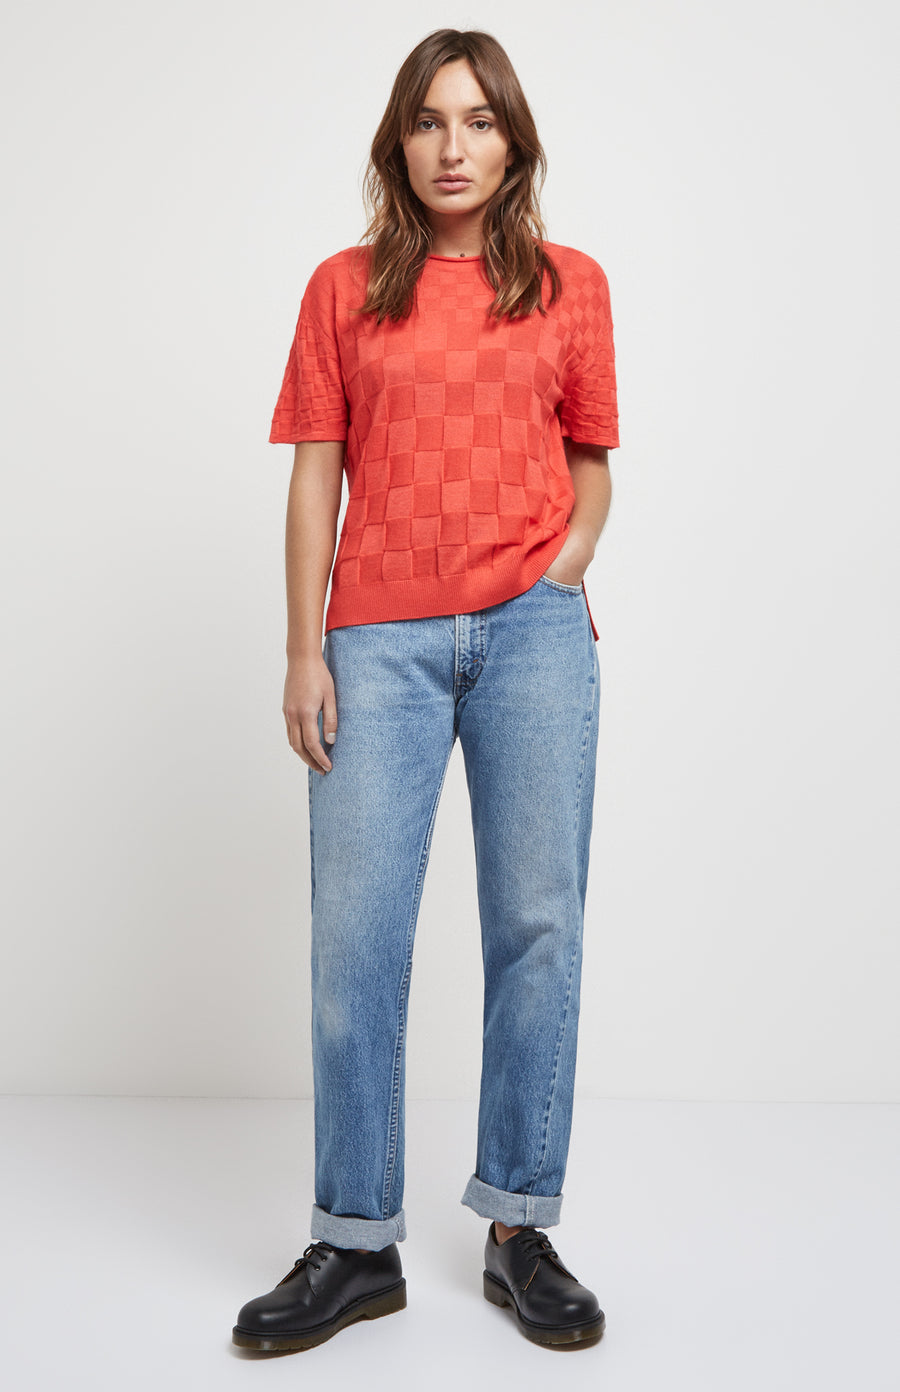 Knitted 3d Check T-shirt In Coral